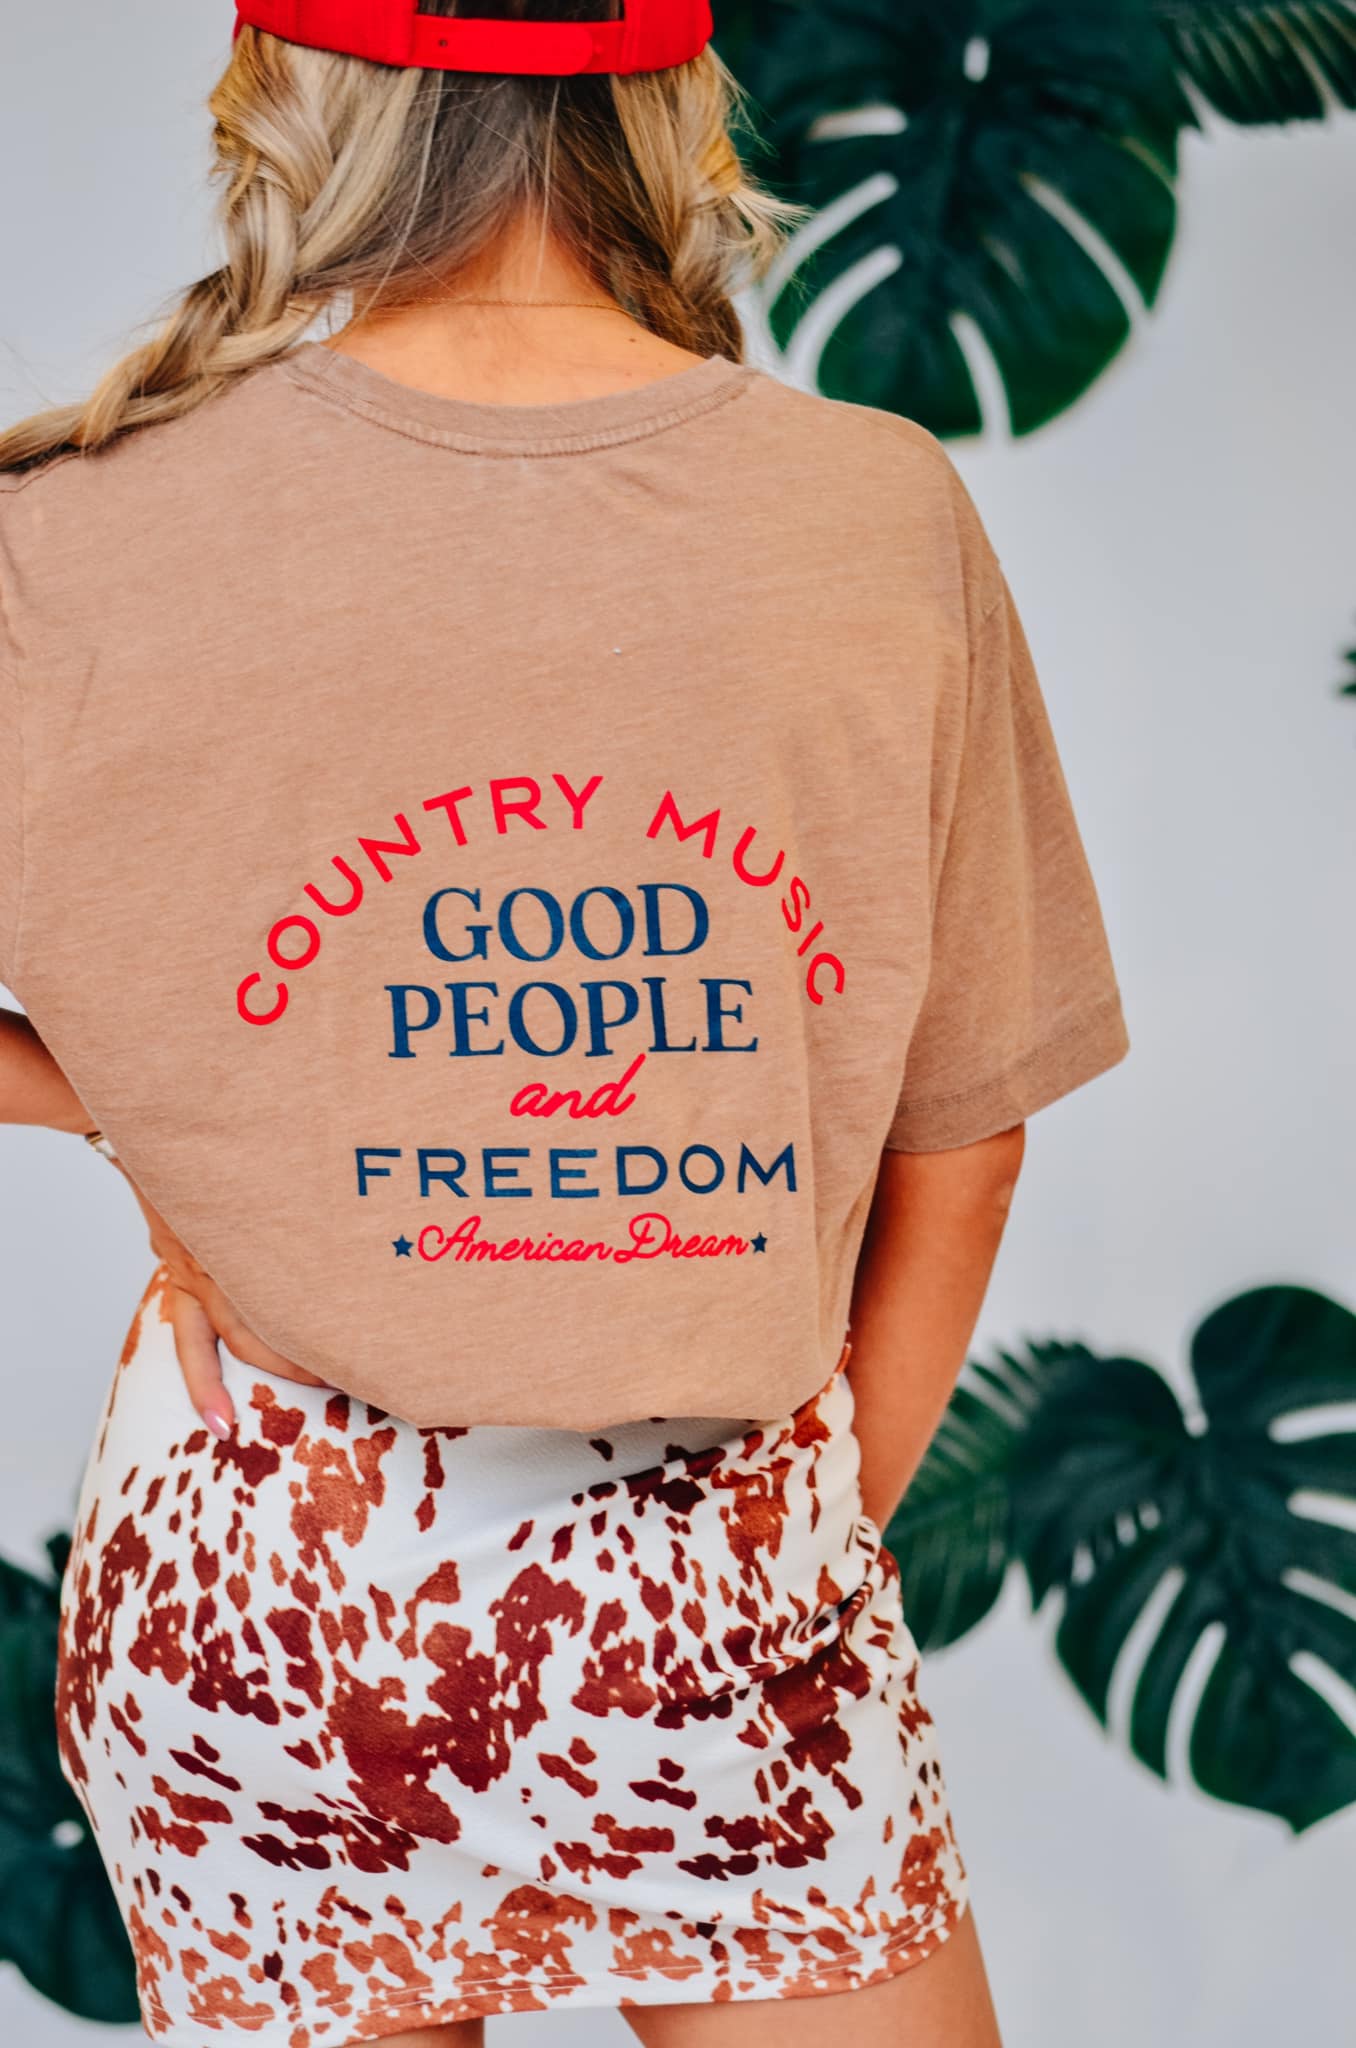 Country Music, Good People, & Freedom